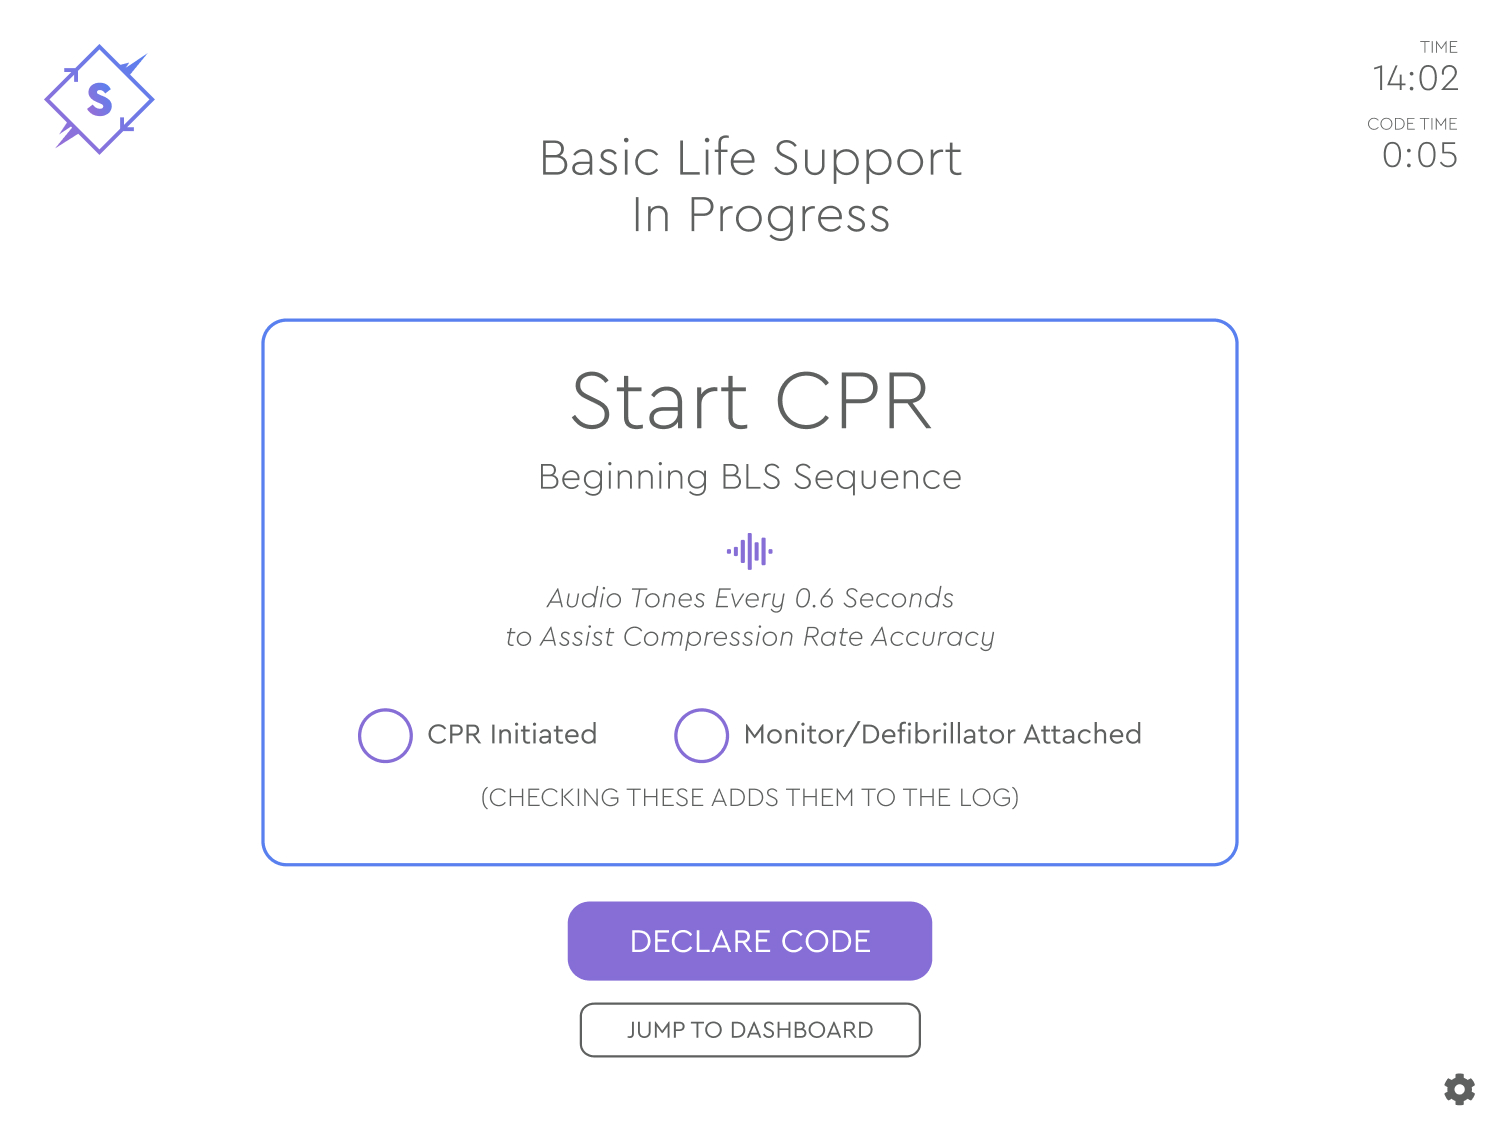 Project image for Synchronize, Start CPR Screen on iPad Pro.